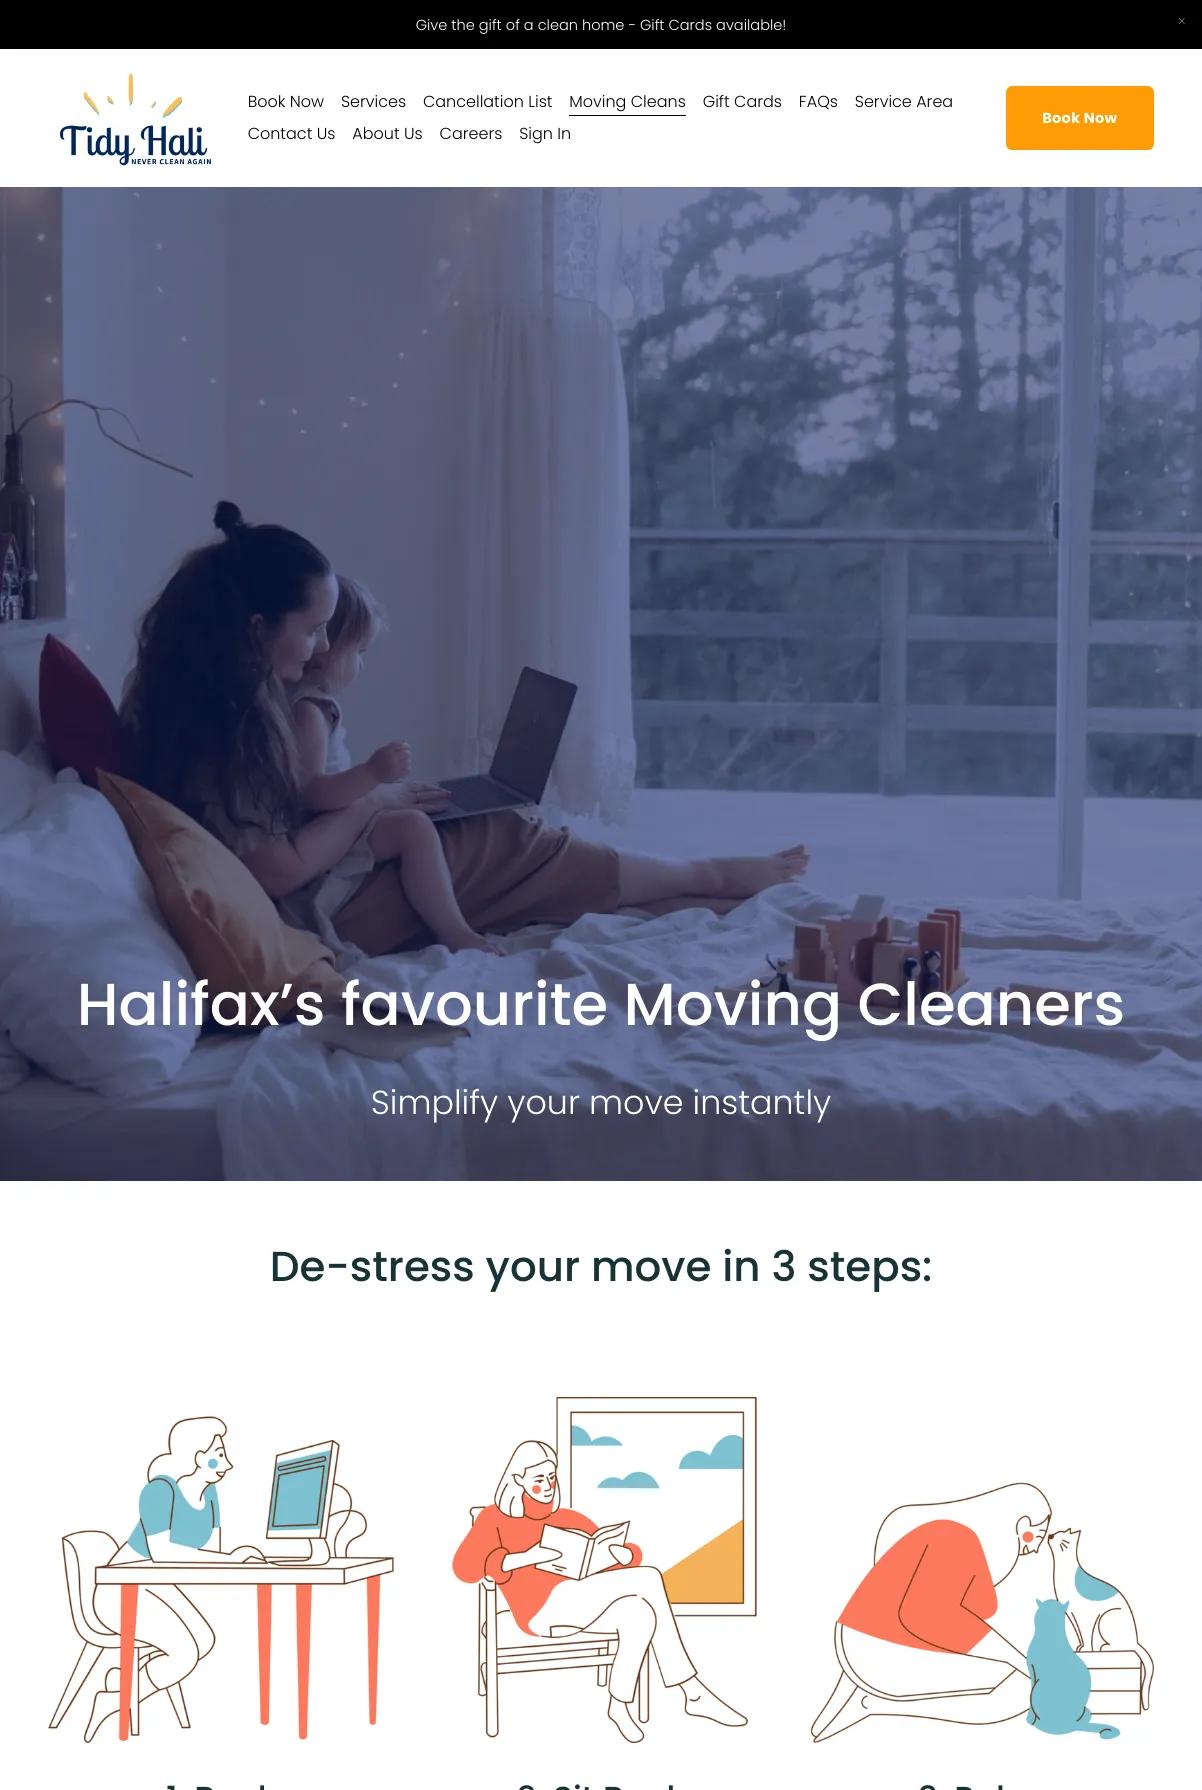 Screenshot 3 of Tidy Hali (Example Squarespace Cleaning Services Website)